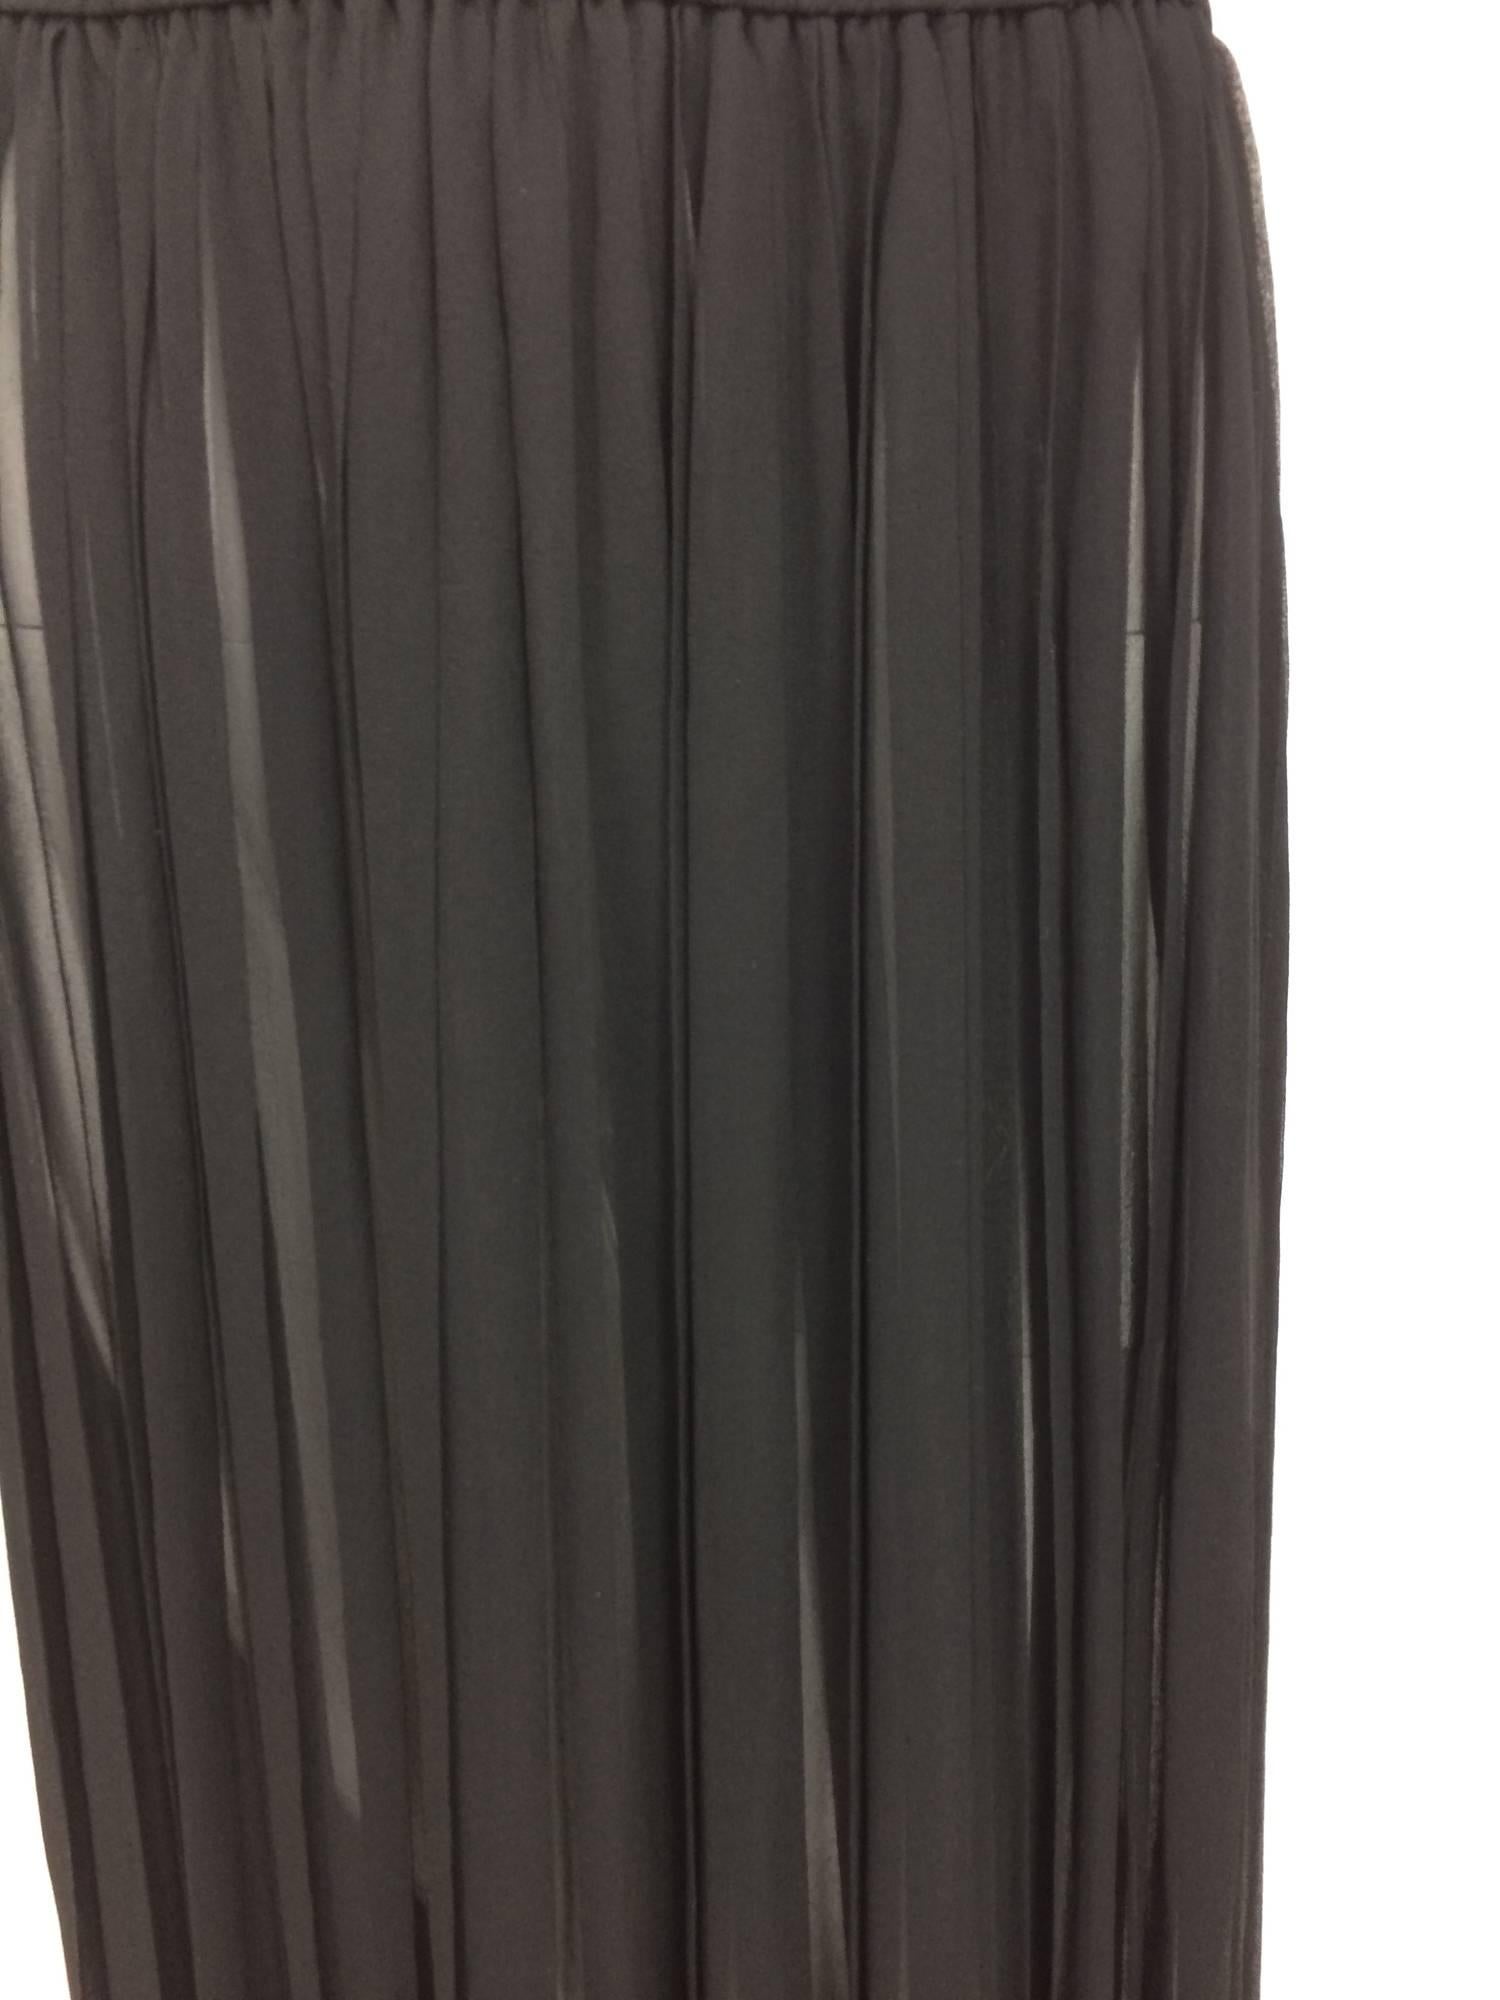 Yves St Laurent knife pleated black silk sheer chiffon maxi skirt from the 1970s. Cased elastic waist. Sexy sheer silk chiffon maxi skirt . Marked size 38

In excellent wearable condition... All our clothing is dry cleaned and inspected for